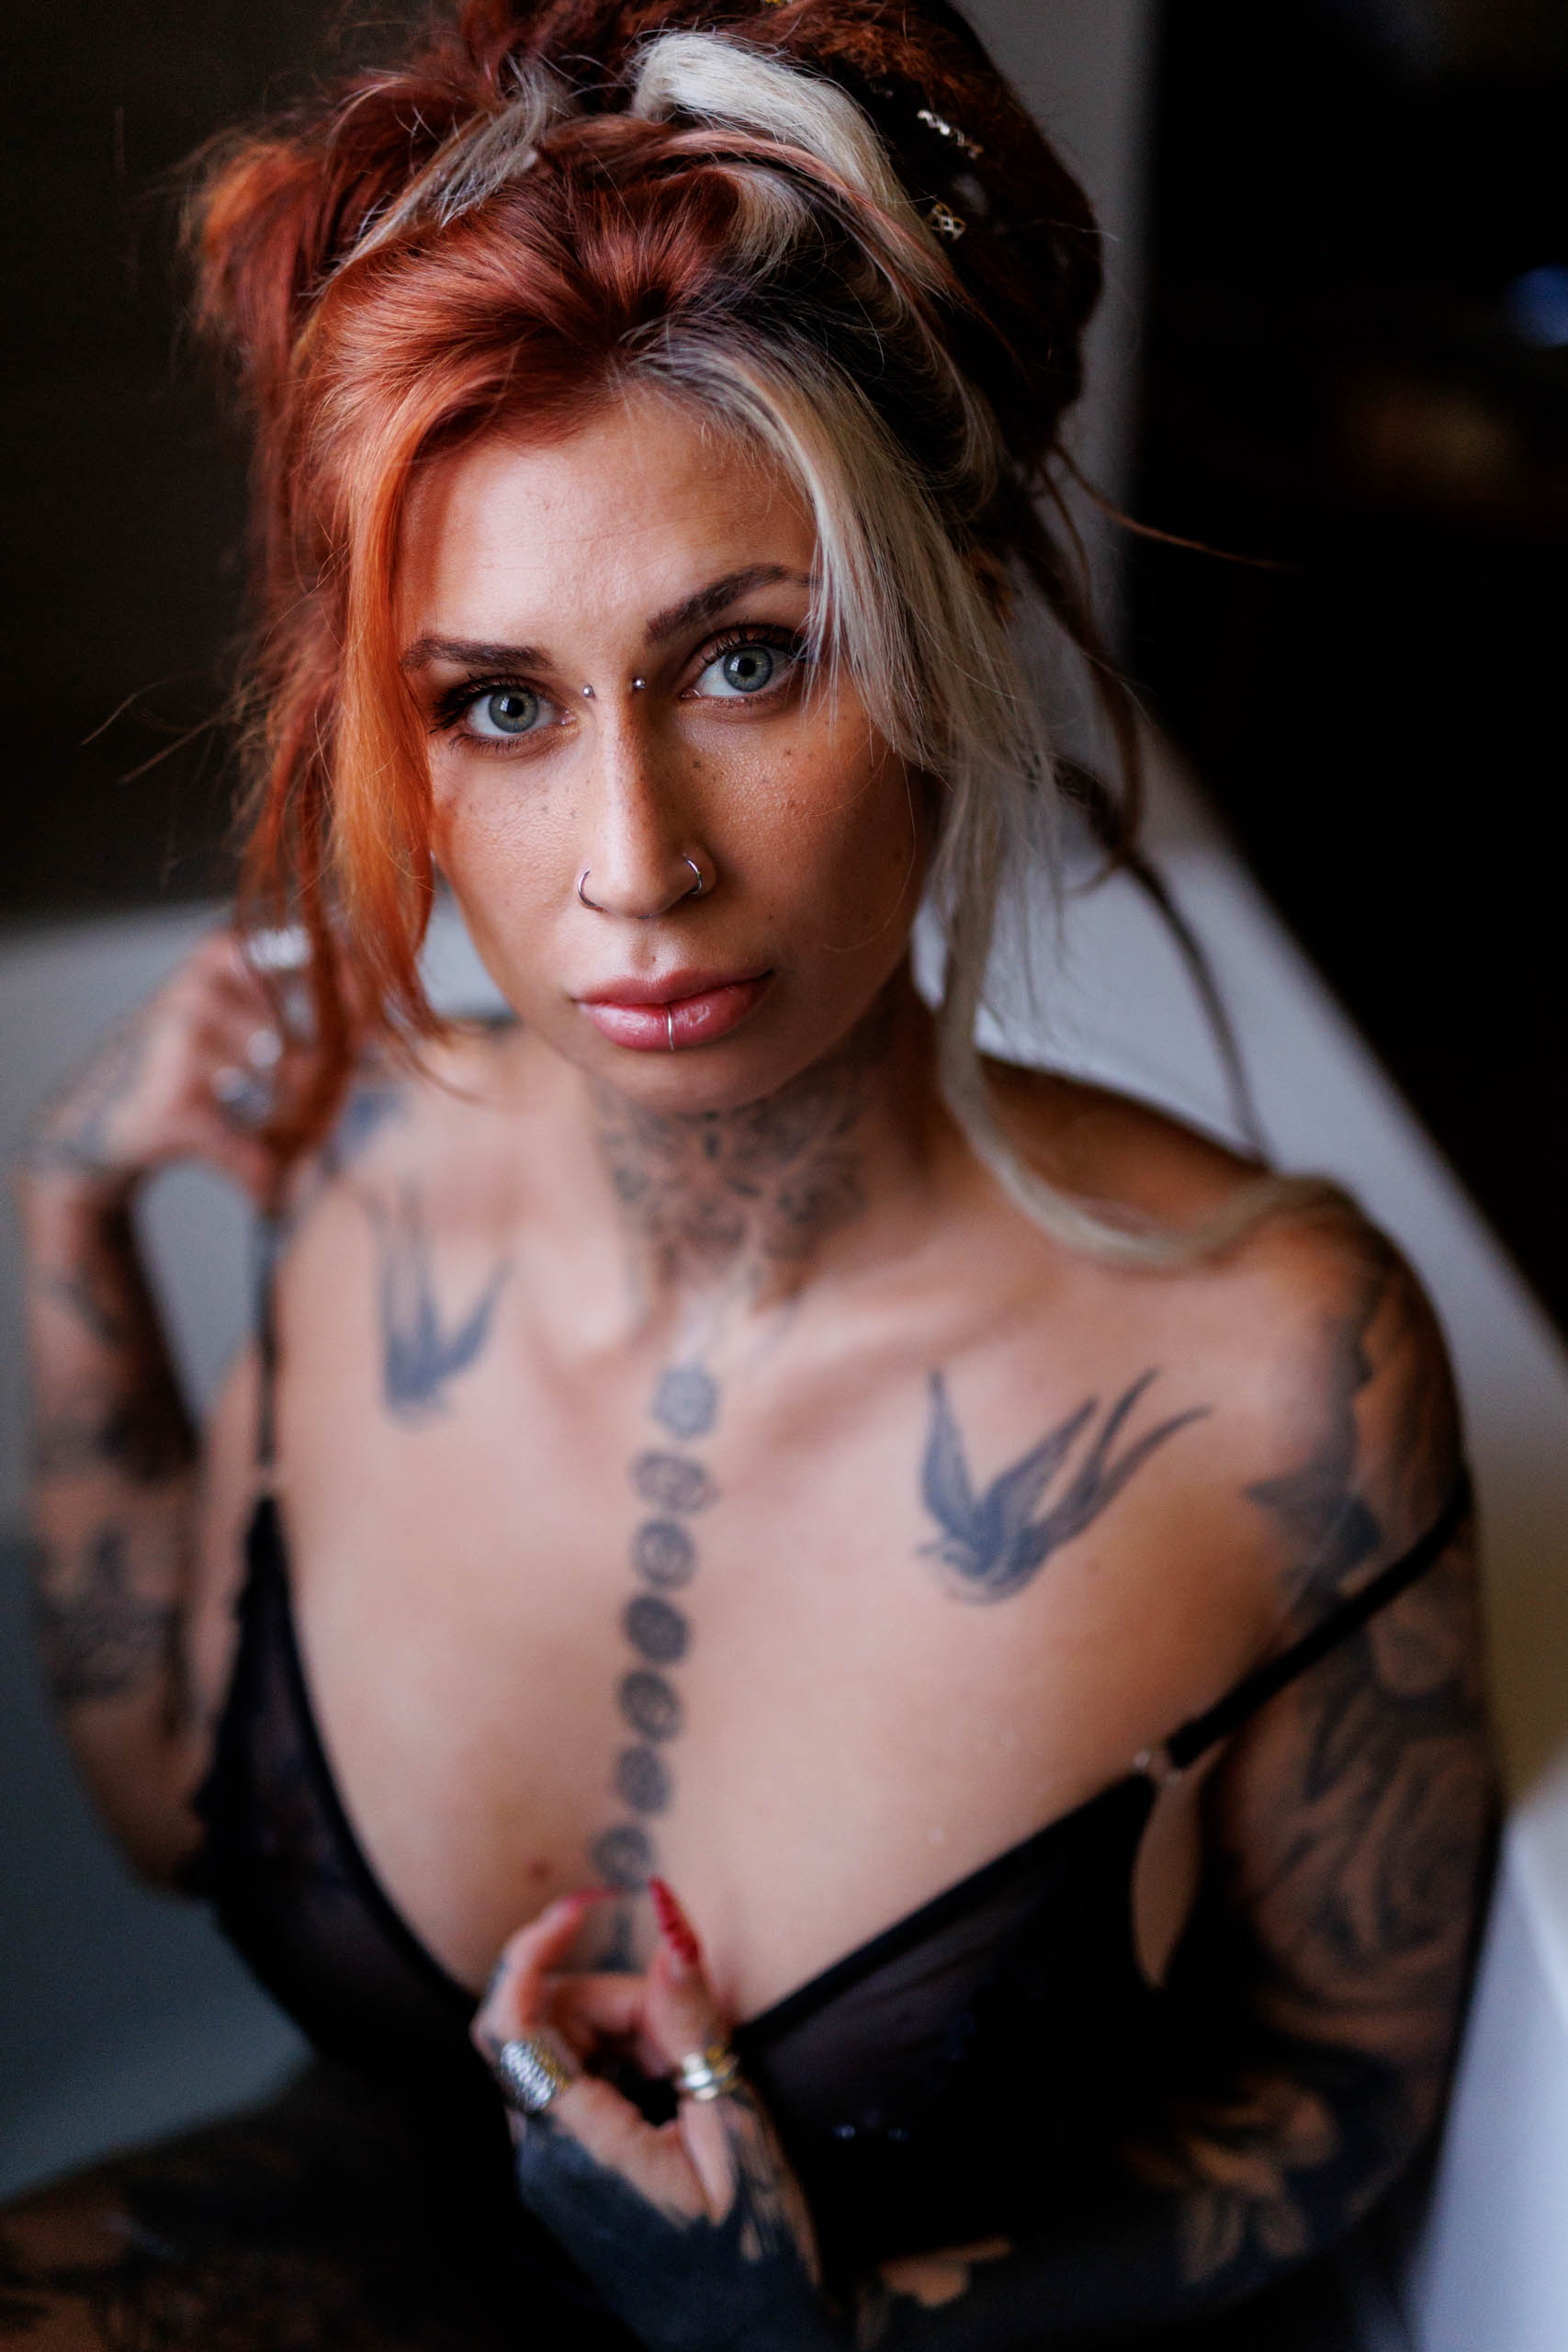 A glamorous woman with tattoos poses in a bathtub during a photo shoot.